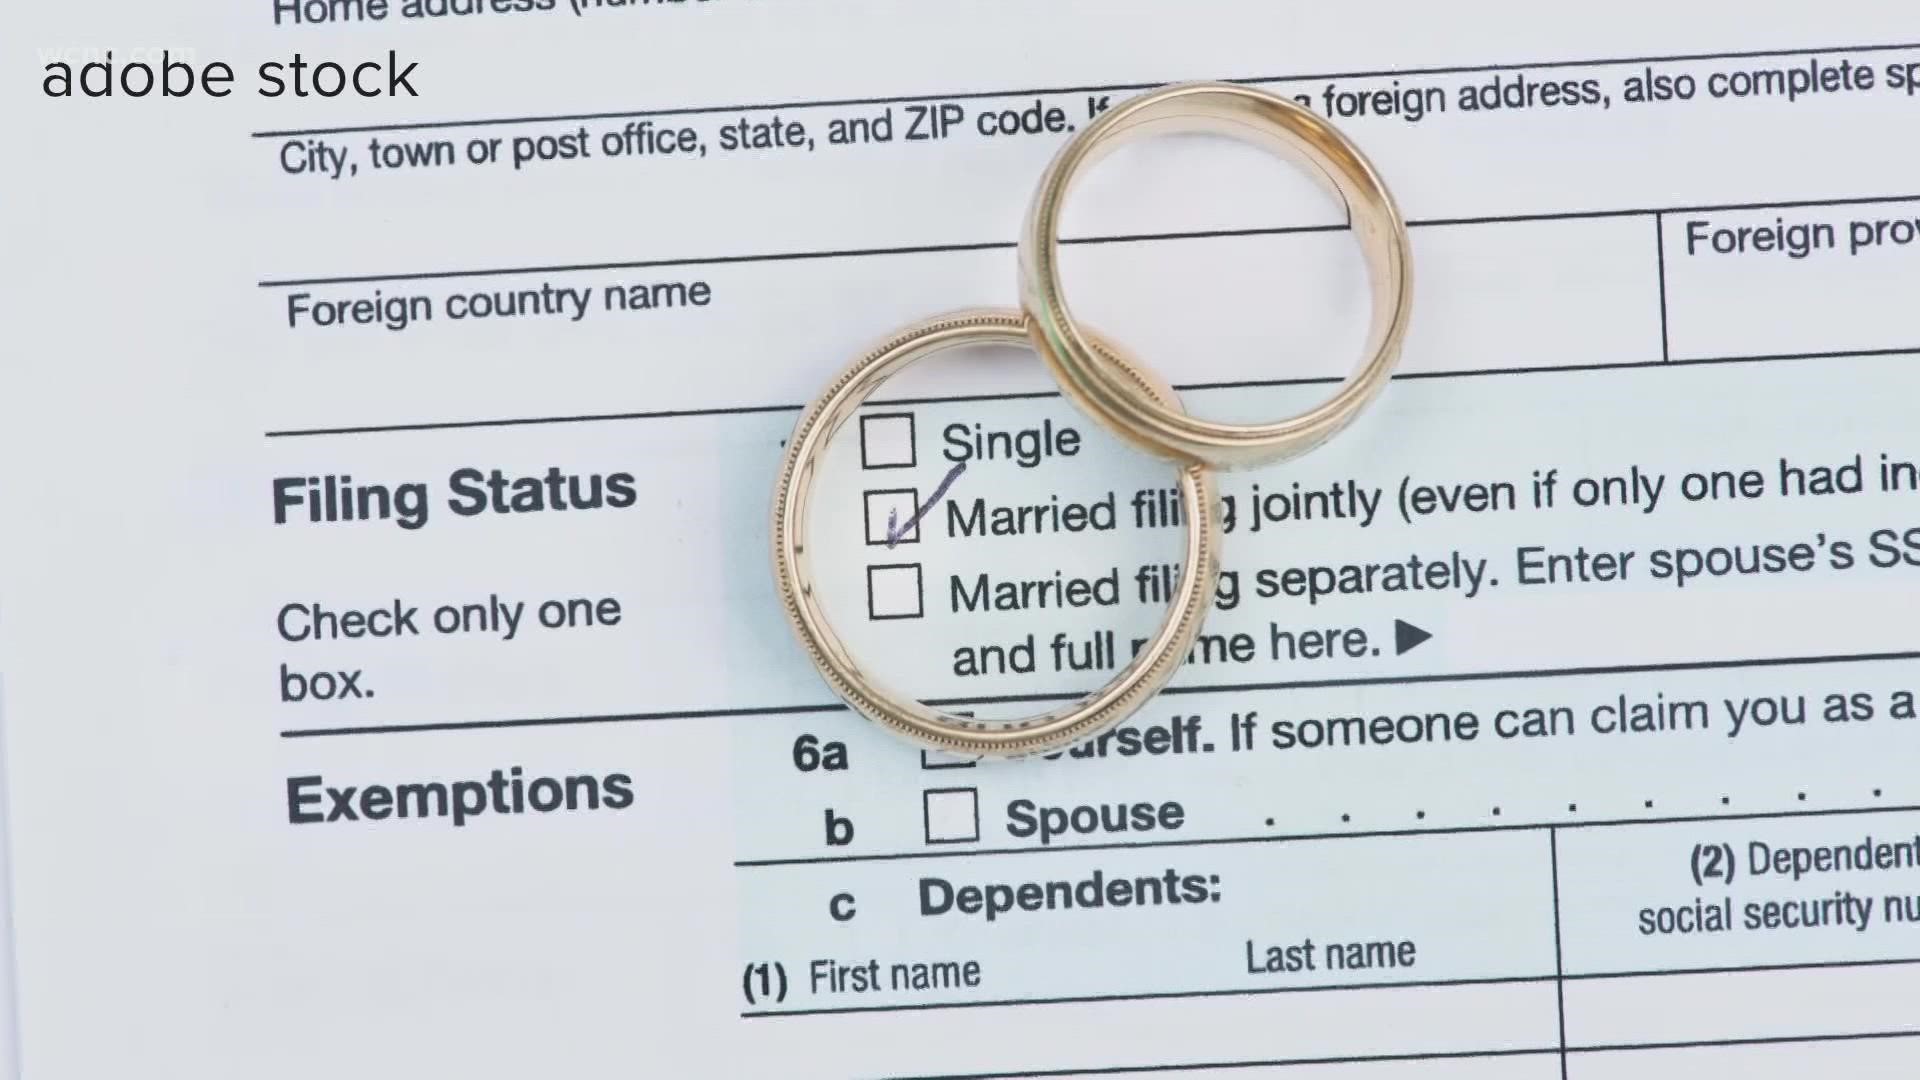 Can married couples file taxes as single? VERIFY